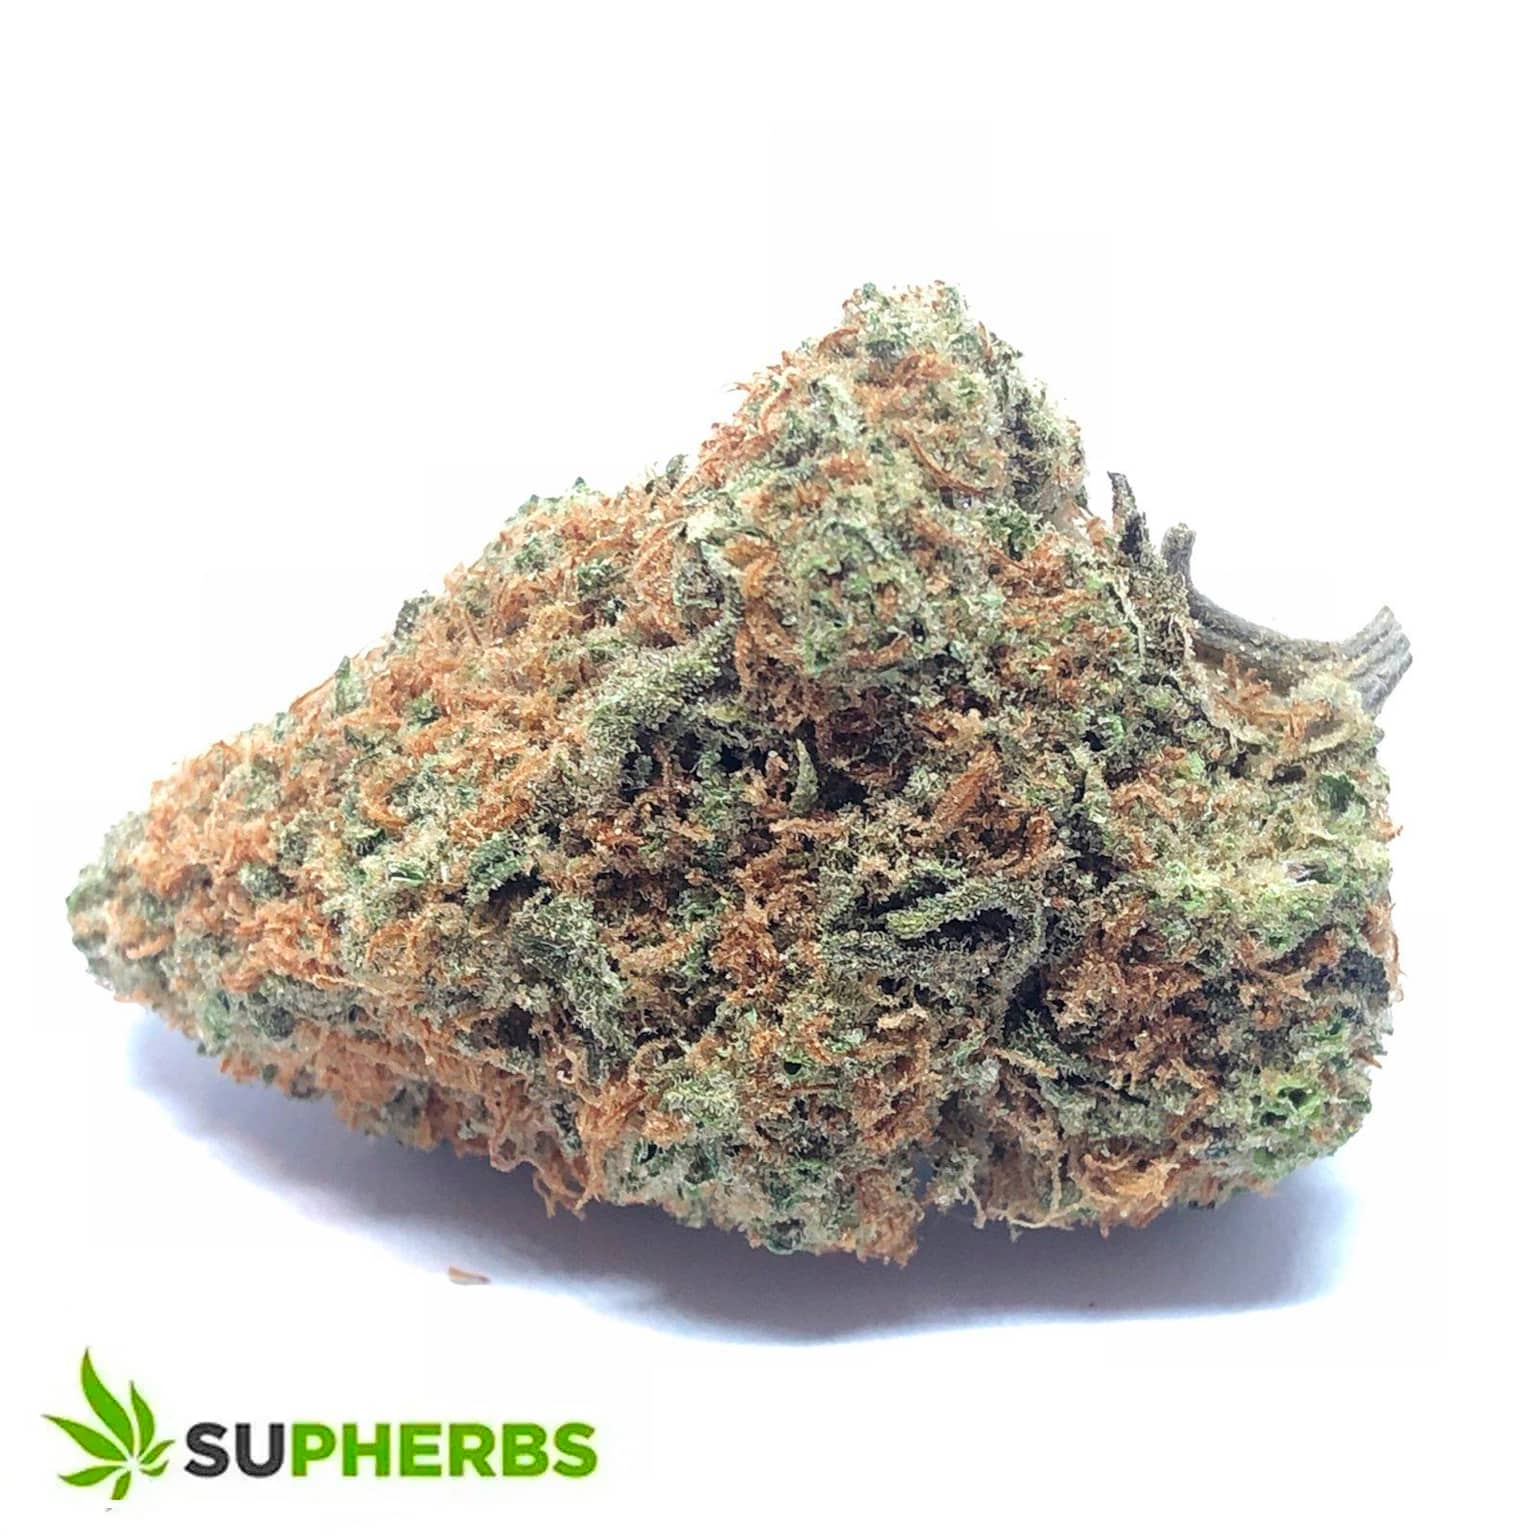 Moby-Dick-Strain-Buy-moby-dick-strain-in-canada-at-supherbs.jpg